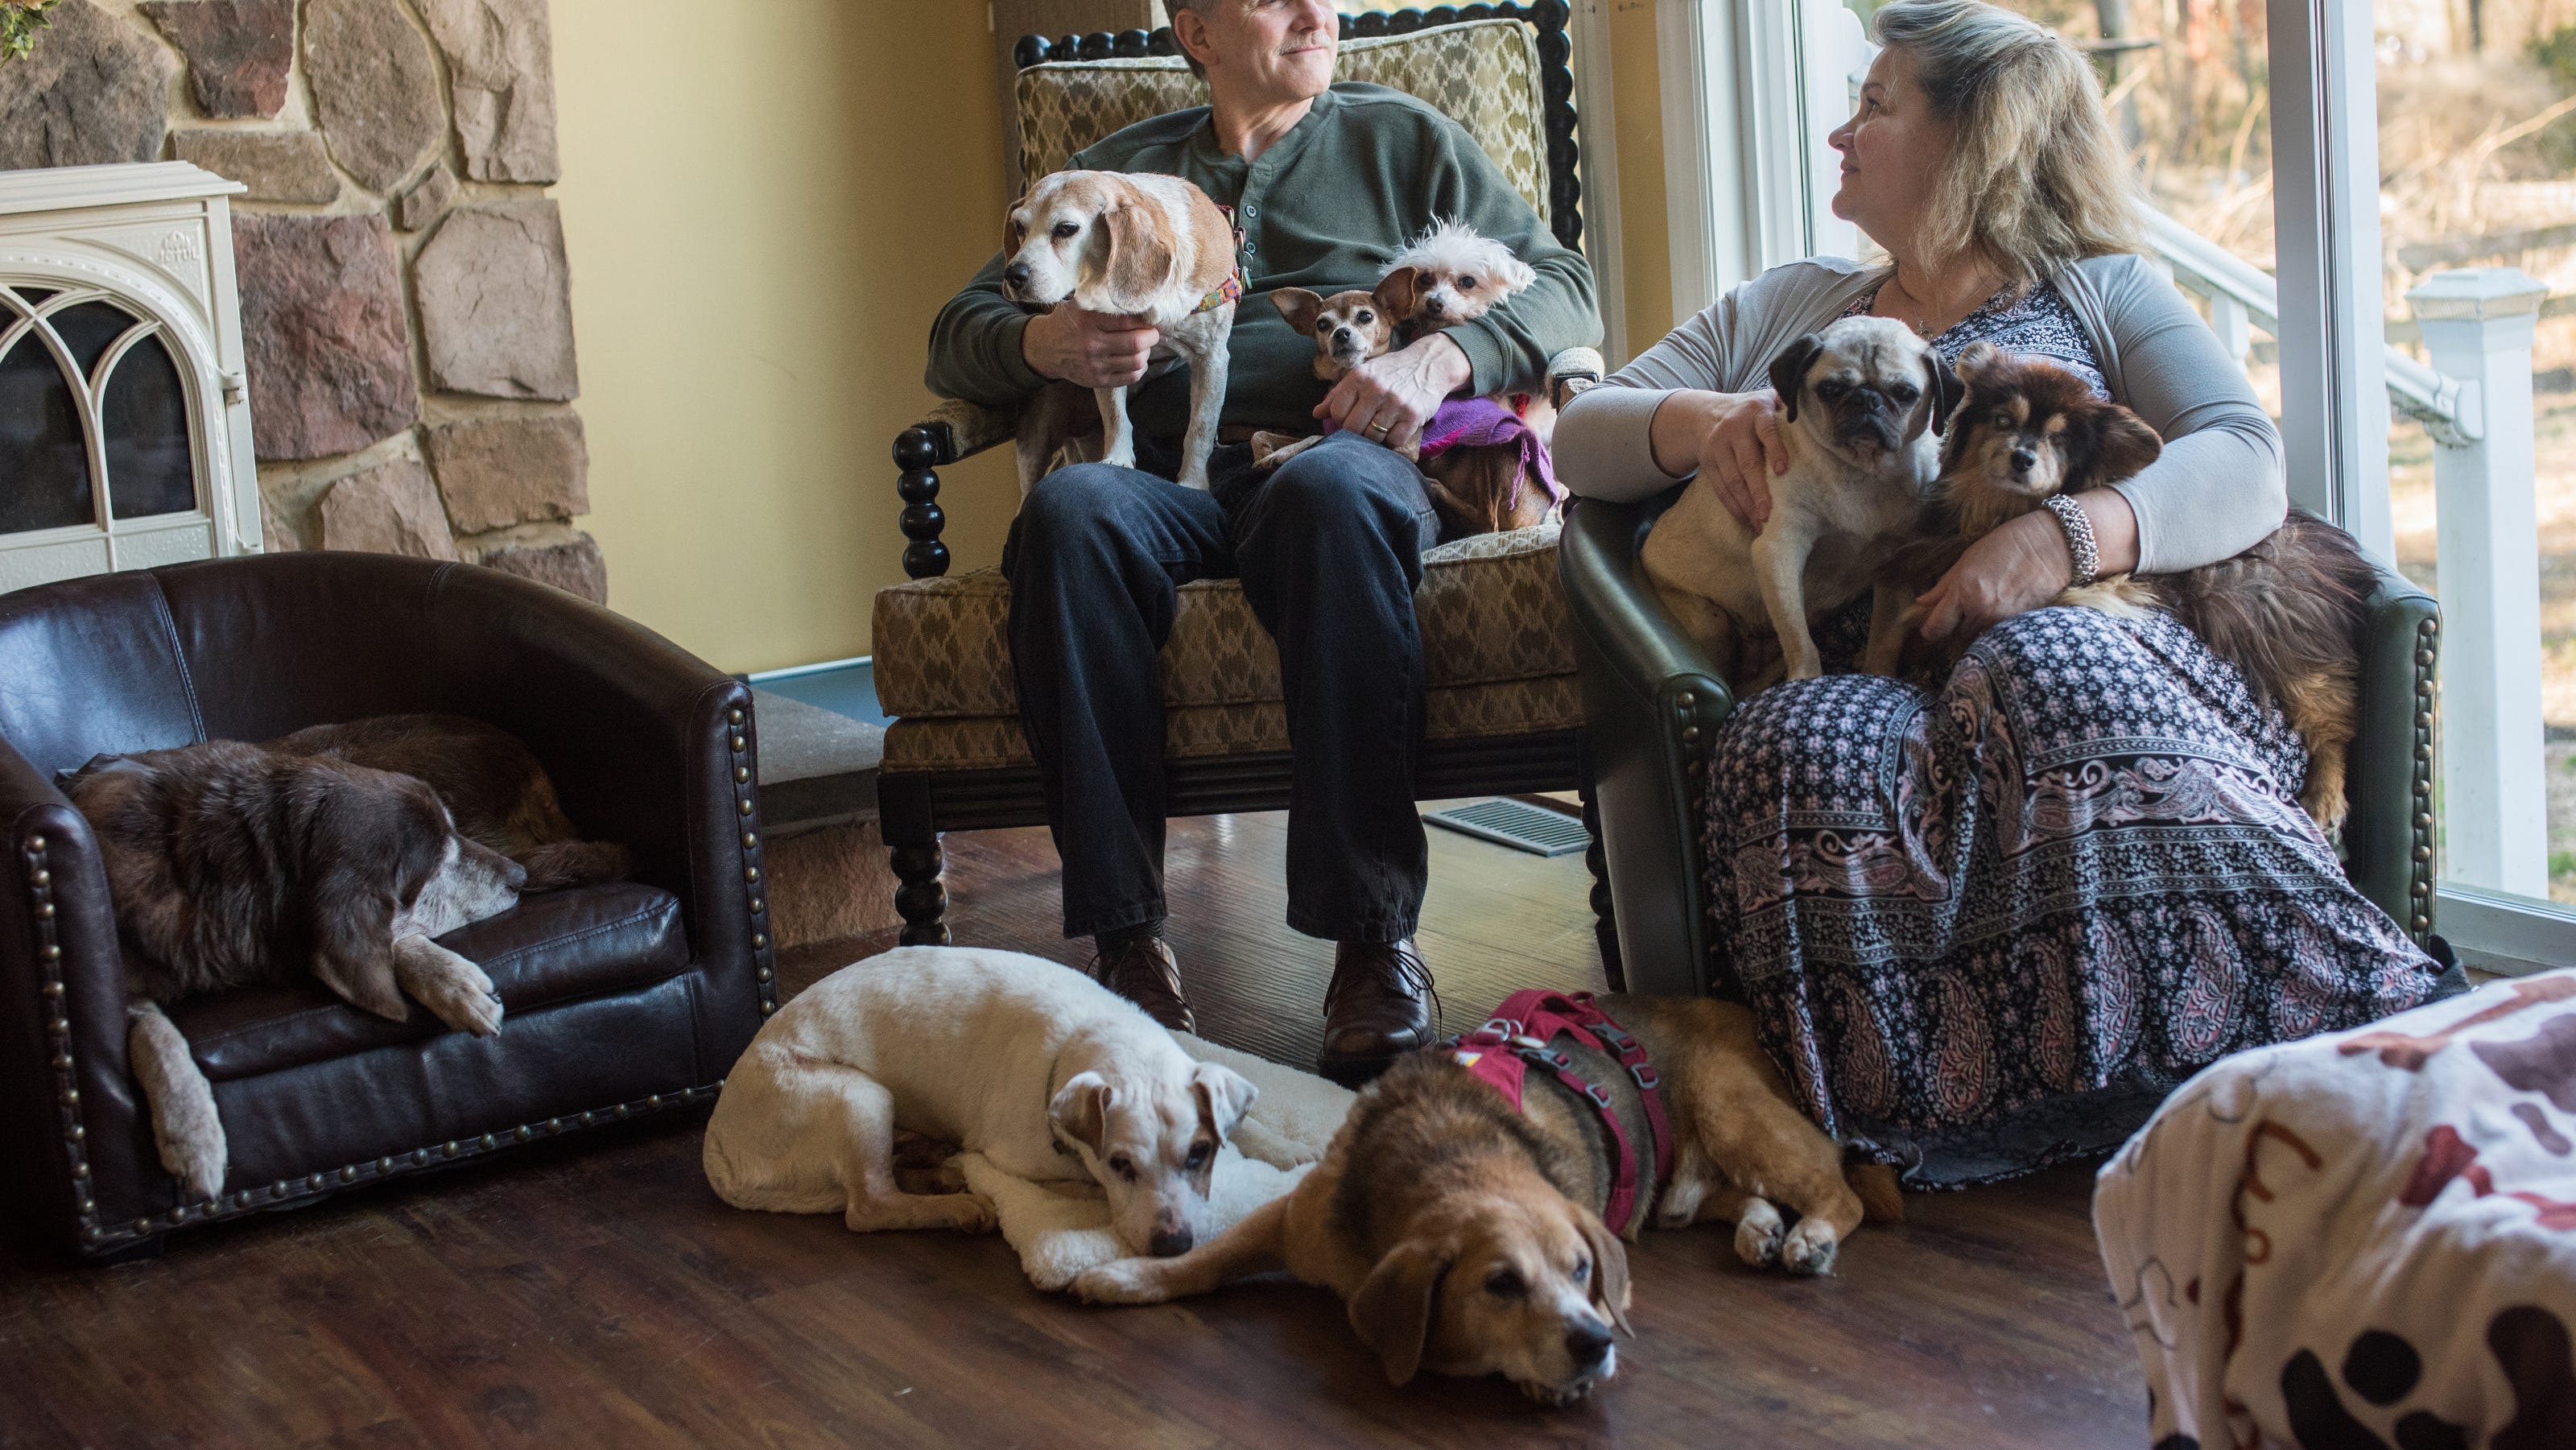 This dog sanctuary only takes in dogs in their final stages of life